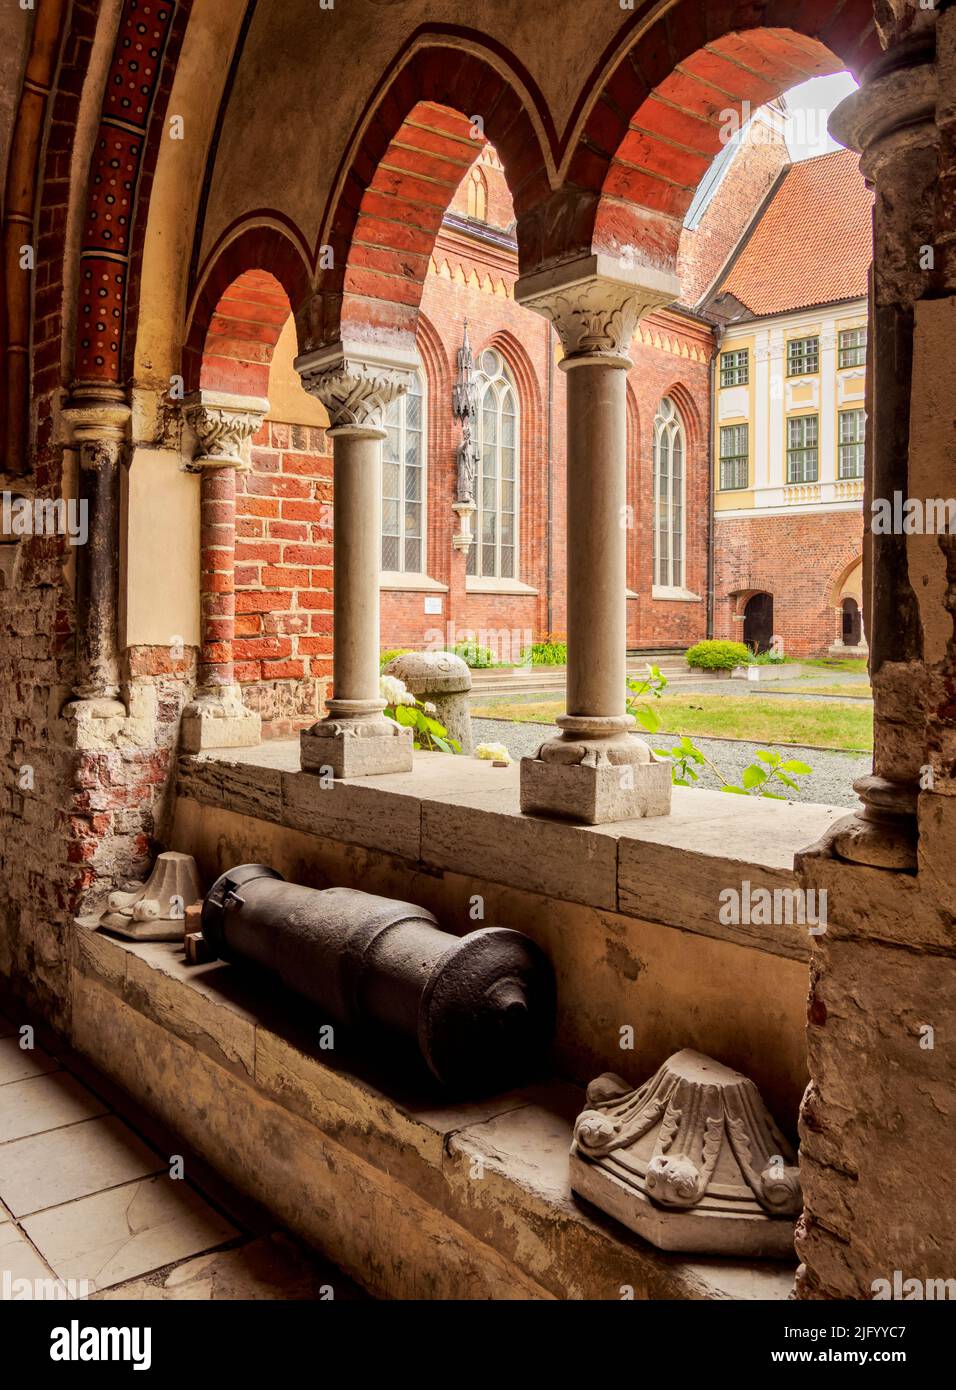 Cloister in Cathedral of Saint Mary (Dome Cathedral), Old Town, UNESCO World Heritage Site, Riga, Latvia, Europe Stock Photo